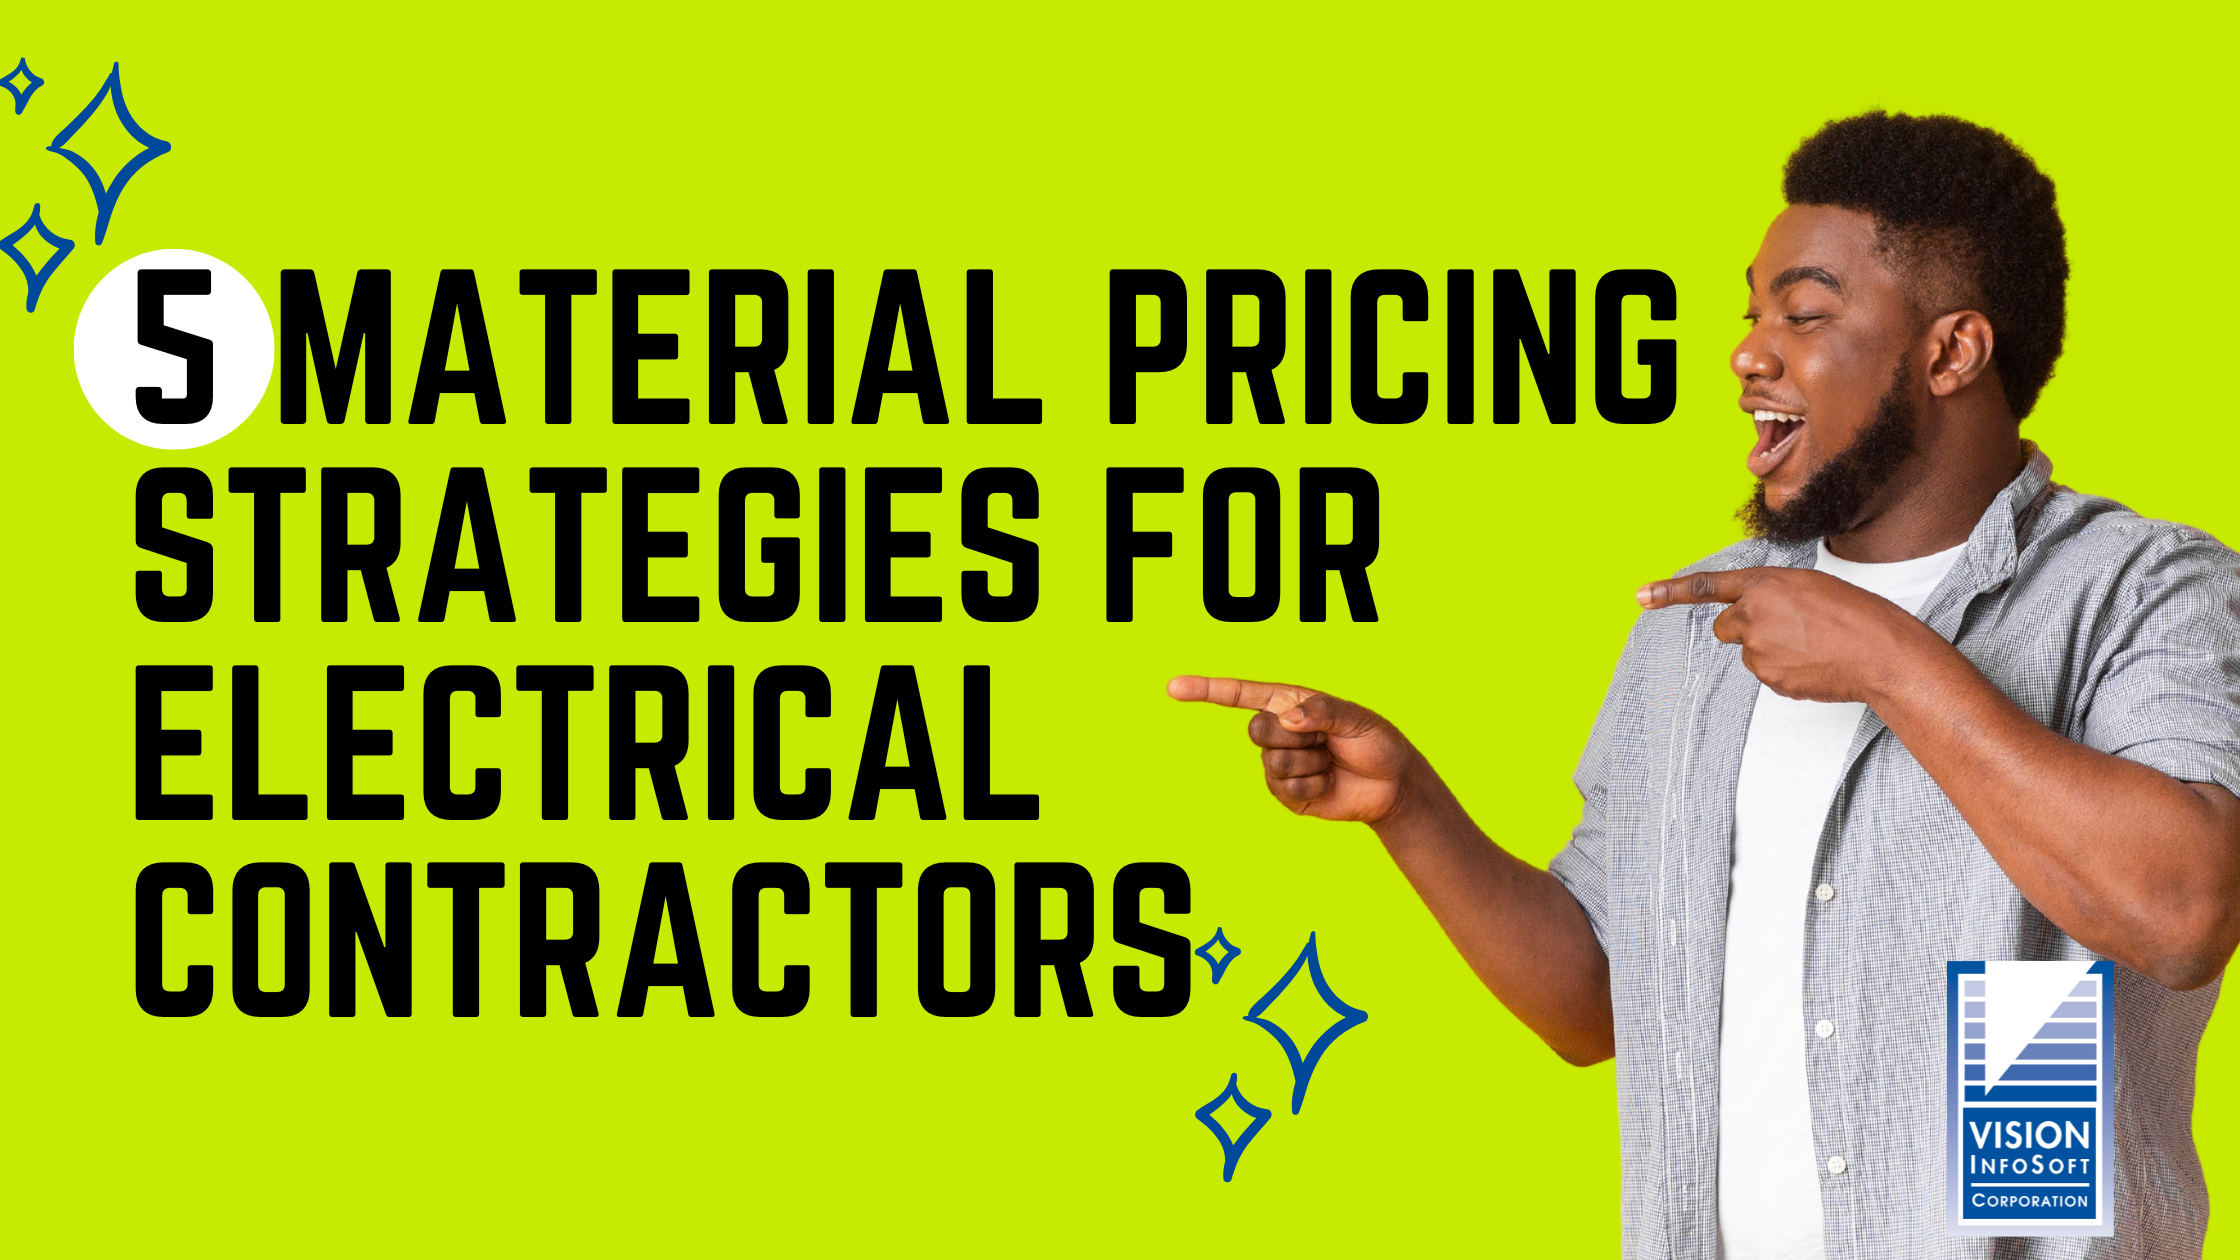 5 Material Pricing Strategies for Electrical Contractors video